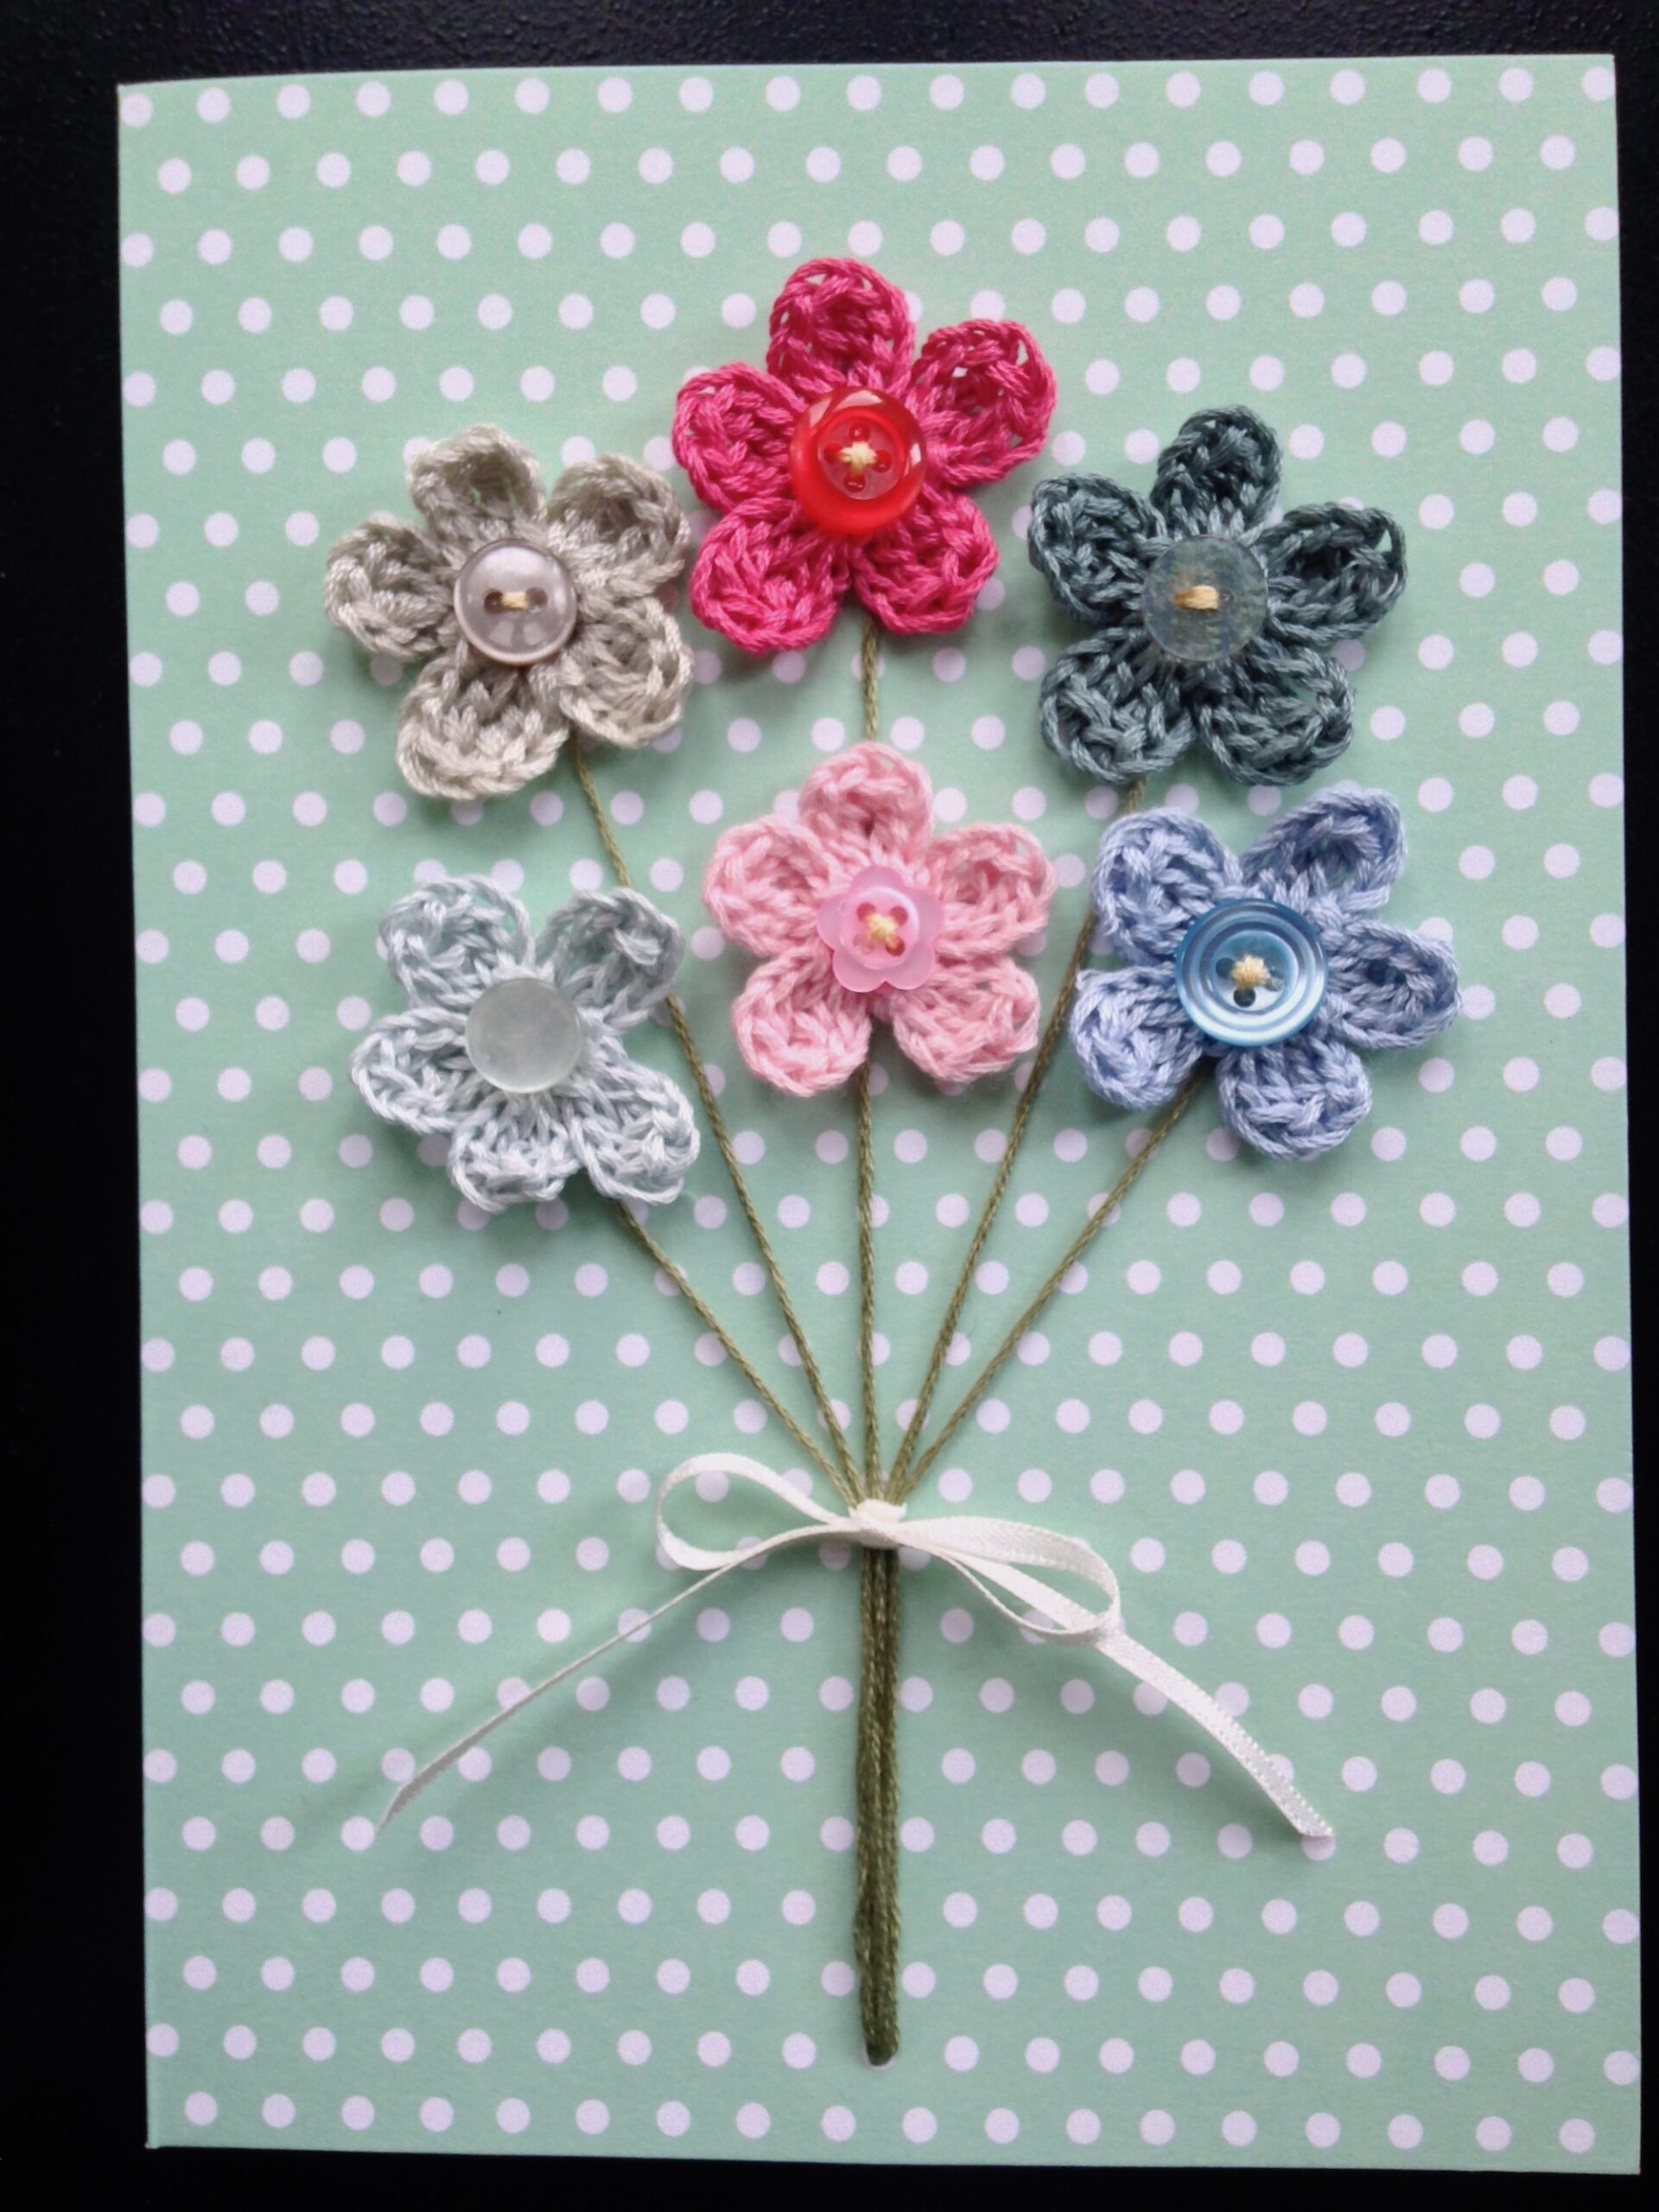 A posy of crocheted flowers.